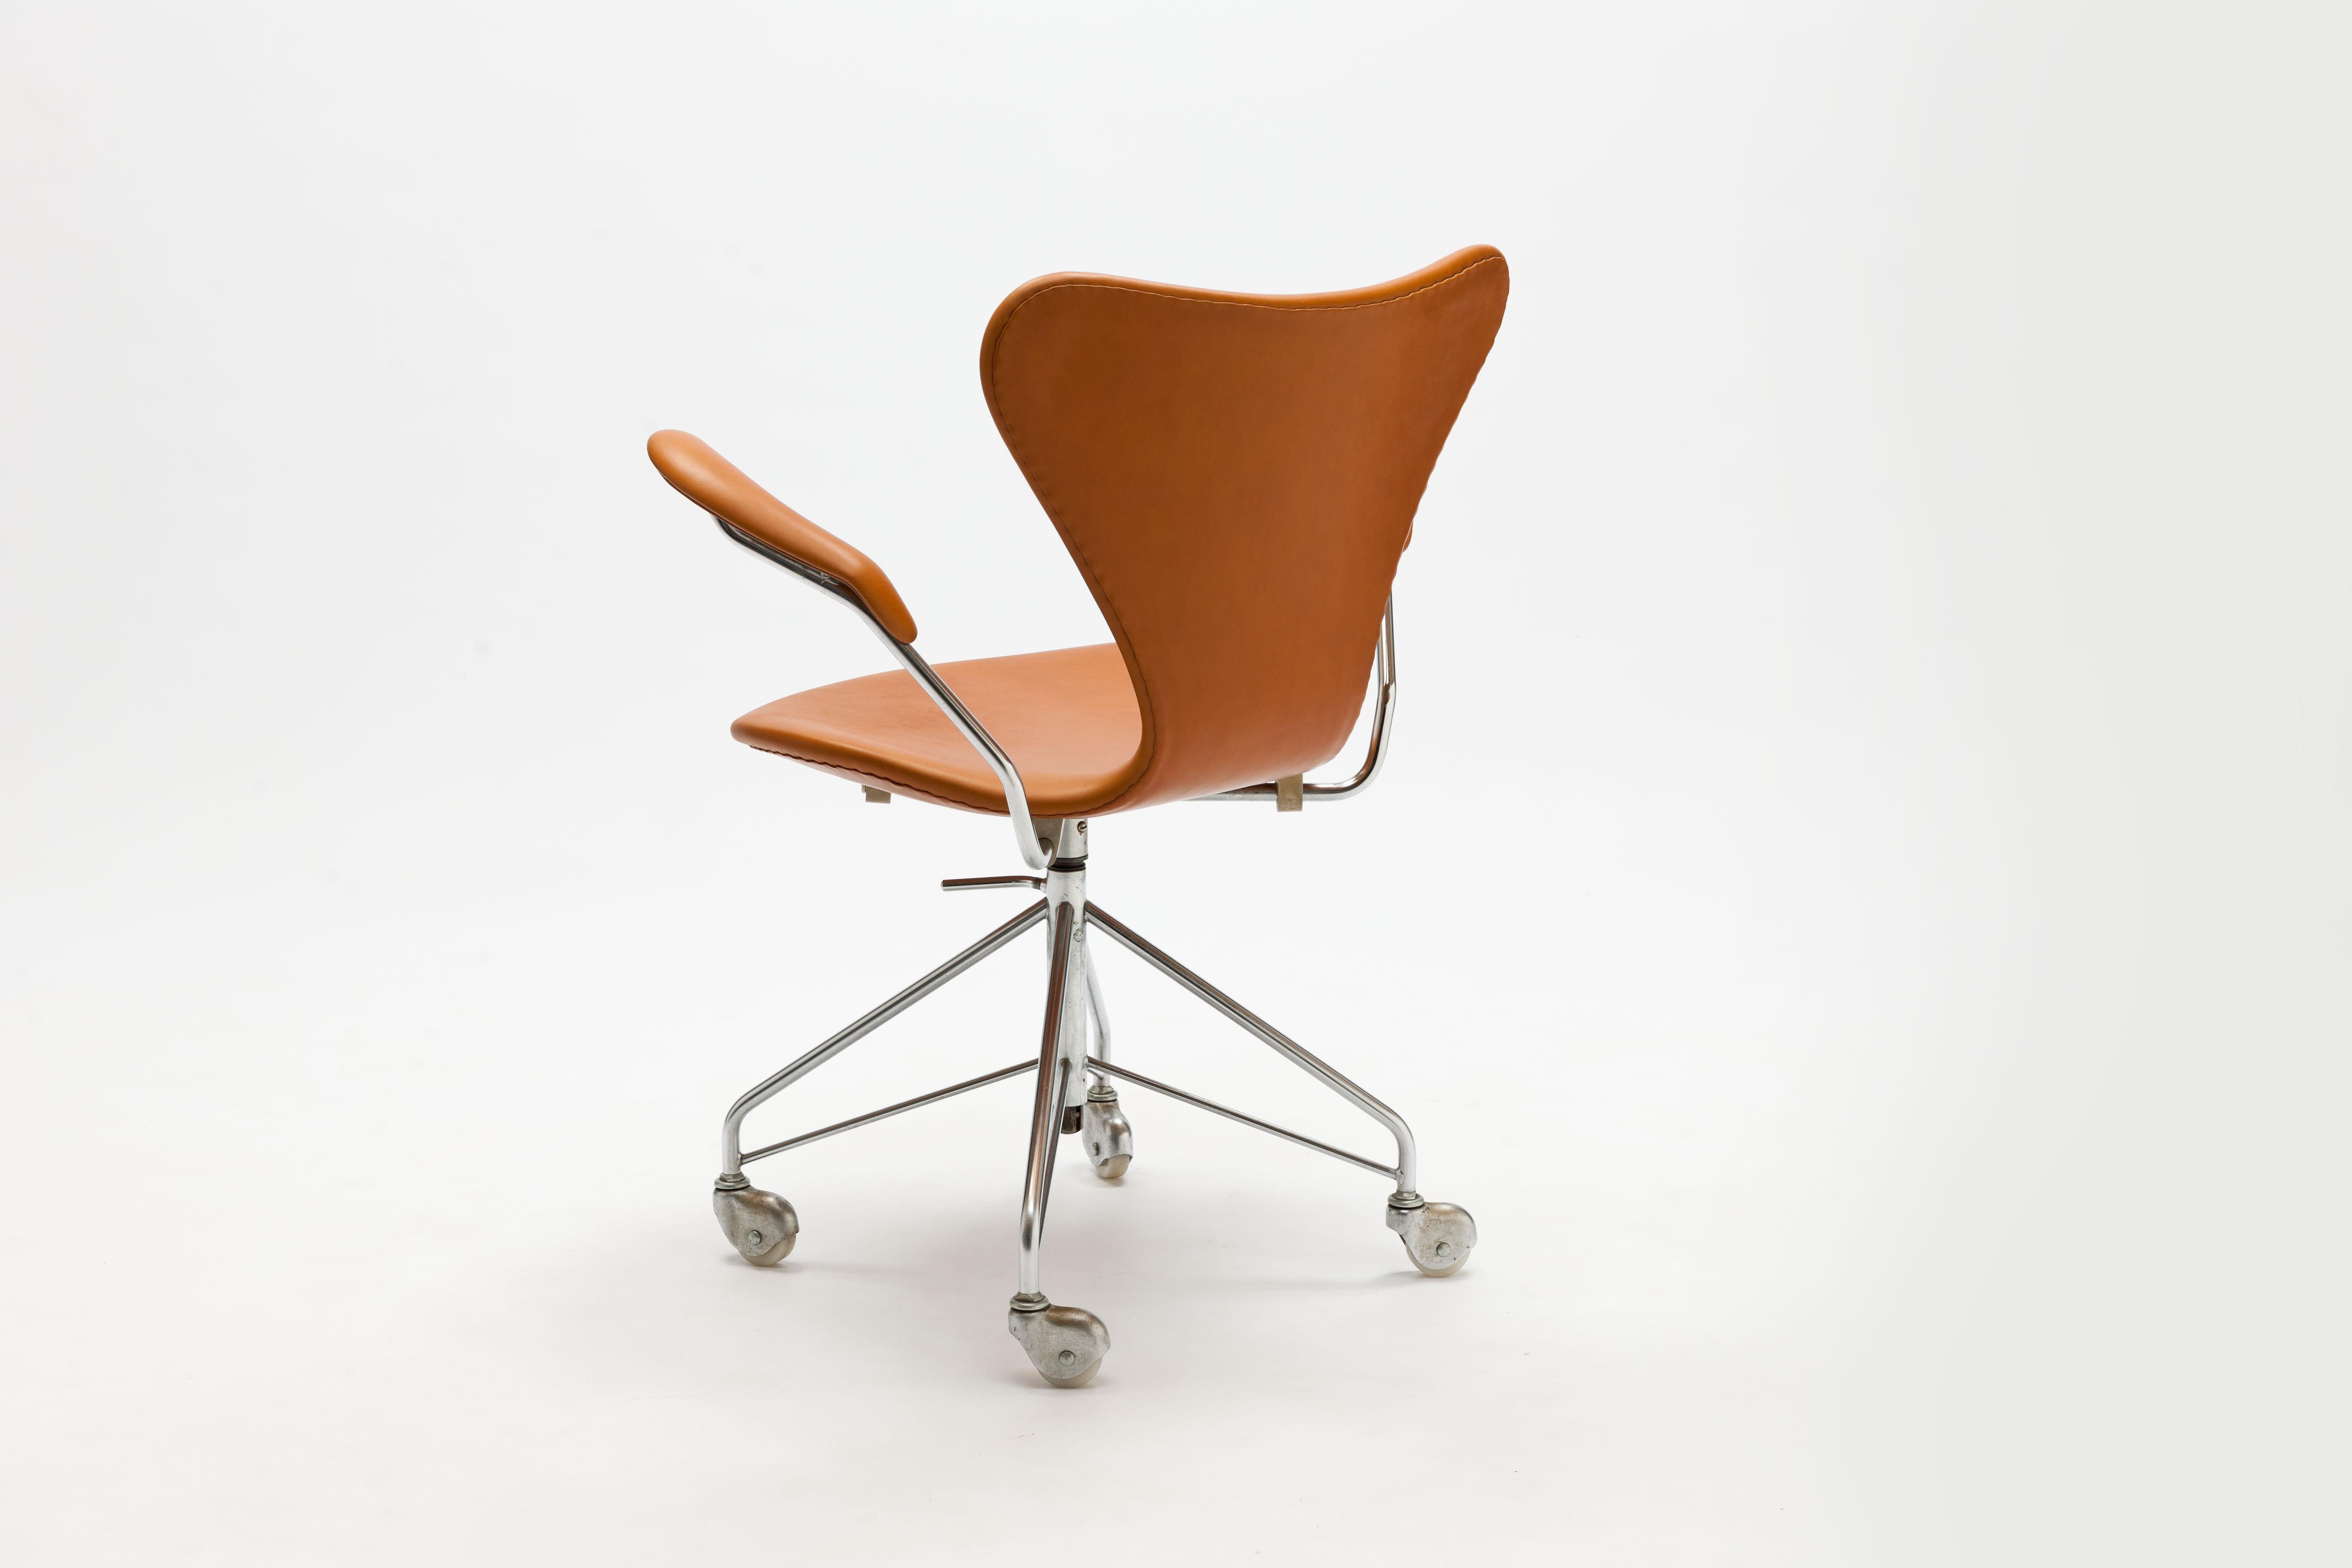 This listing includes the following 4 items for Sony: 

* Item: LU932713307582 = 2 x vintage 'Bird' swivel office chairs by Kastholm - Fabricius, according listing 
* item: LU932714127361 = 1 x vintage cognac leather swivel desk chair by Arne